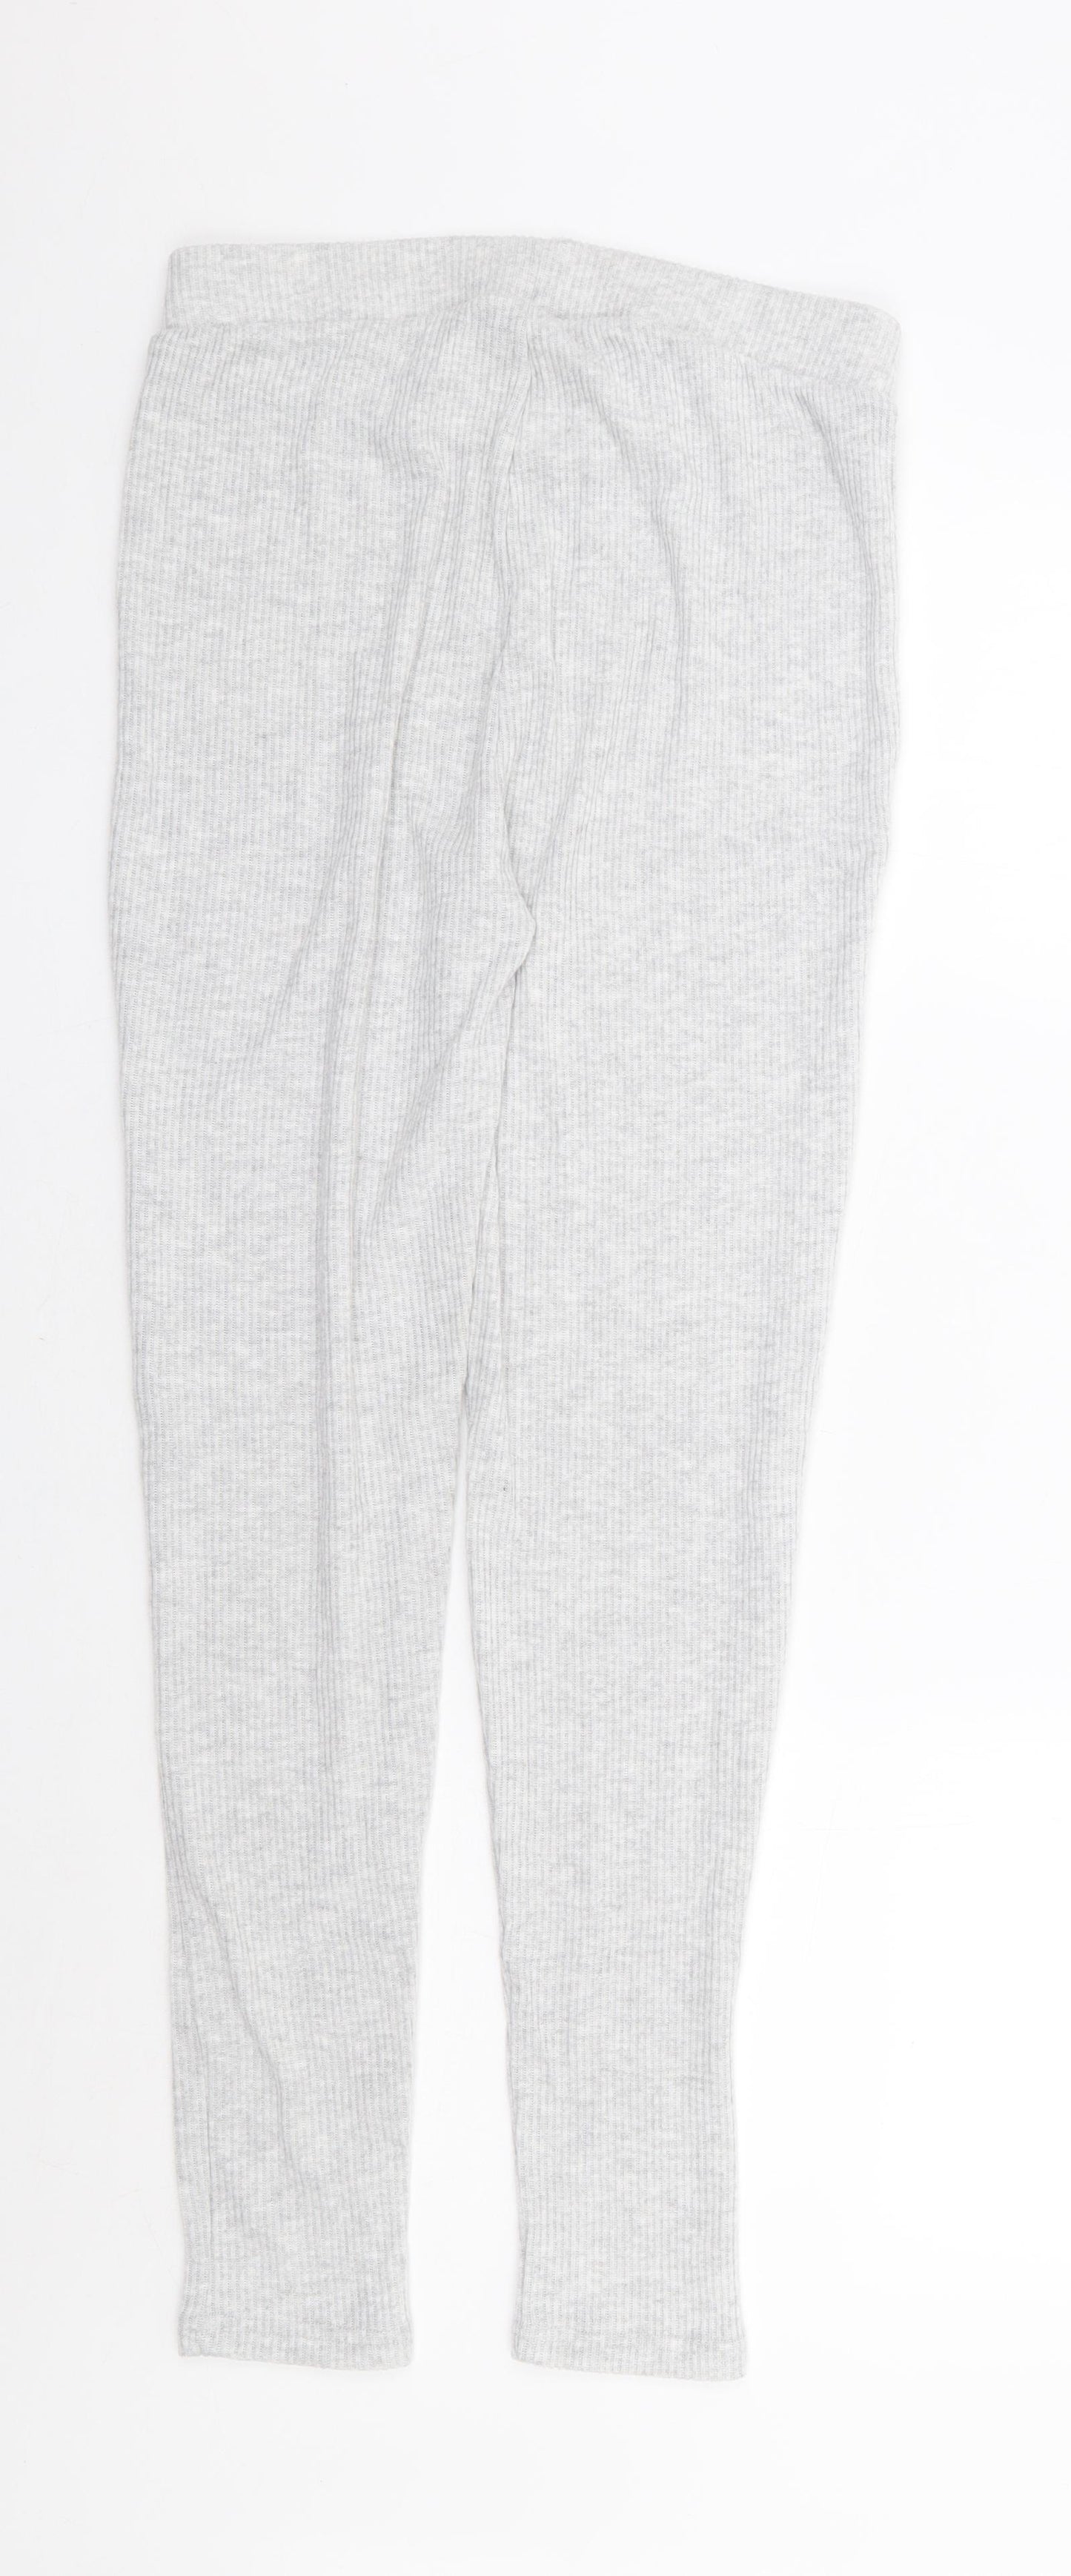 Primark Womens Grey Polyester Jogger Leggings Size 10 L28 in - Ribbed Lounge Pant